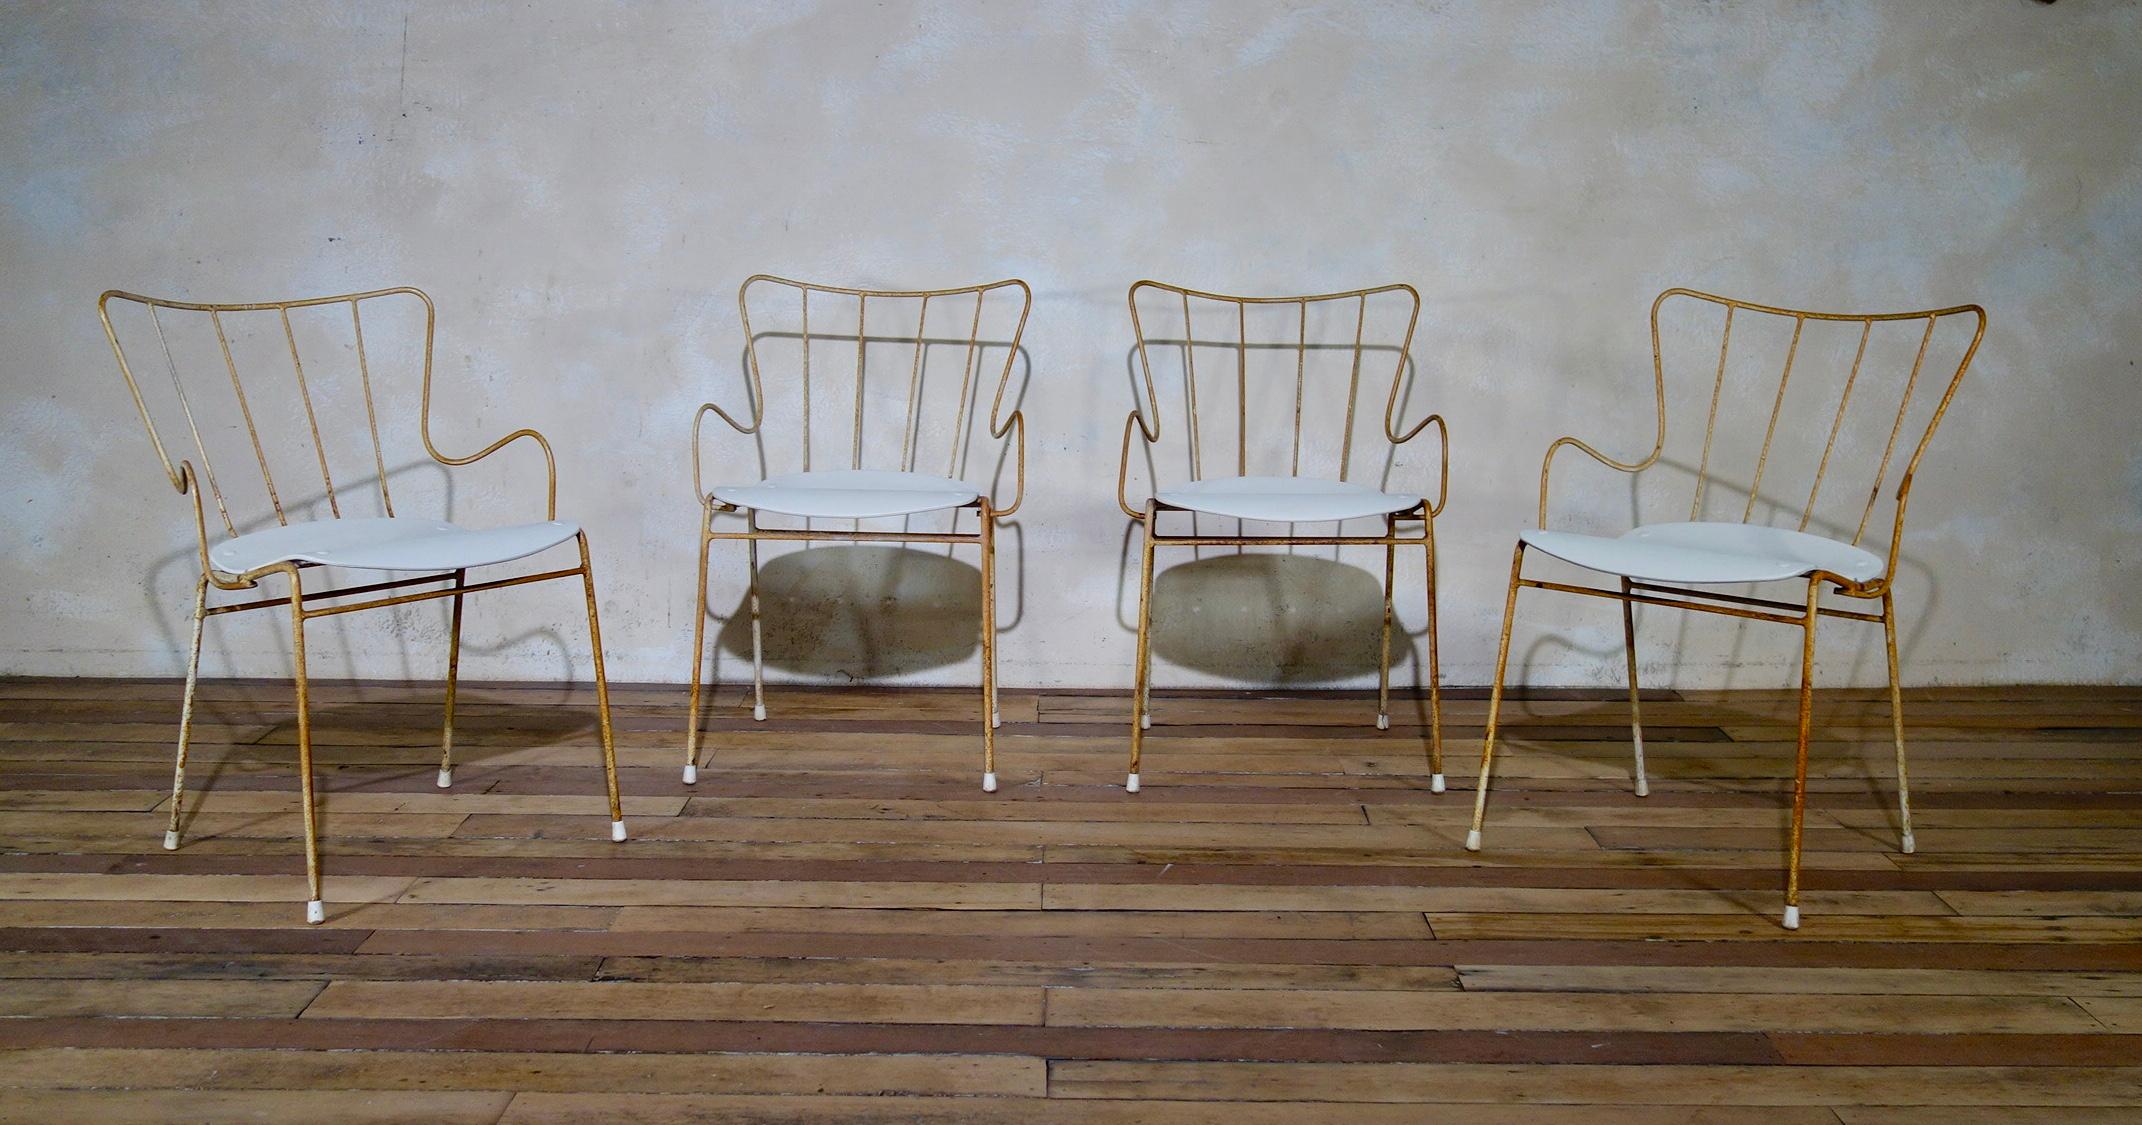 20th Century A Set of Four Vintage Ernest Race Antelope Chairs Painted Outdoor Dining Garden